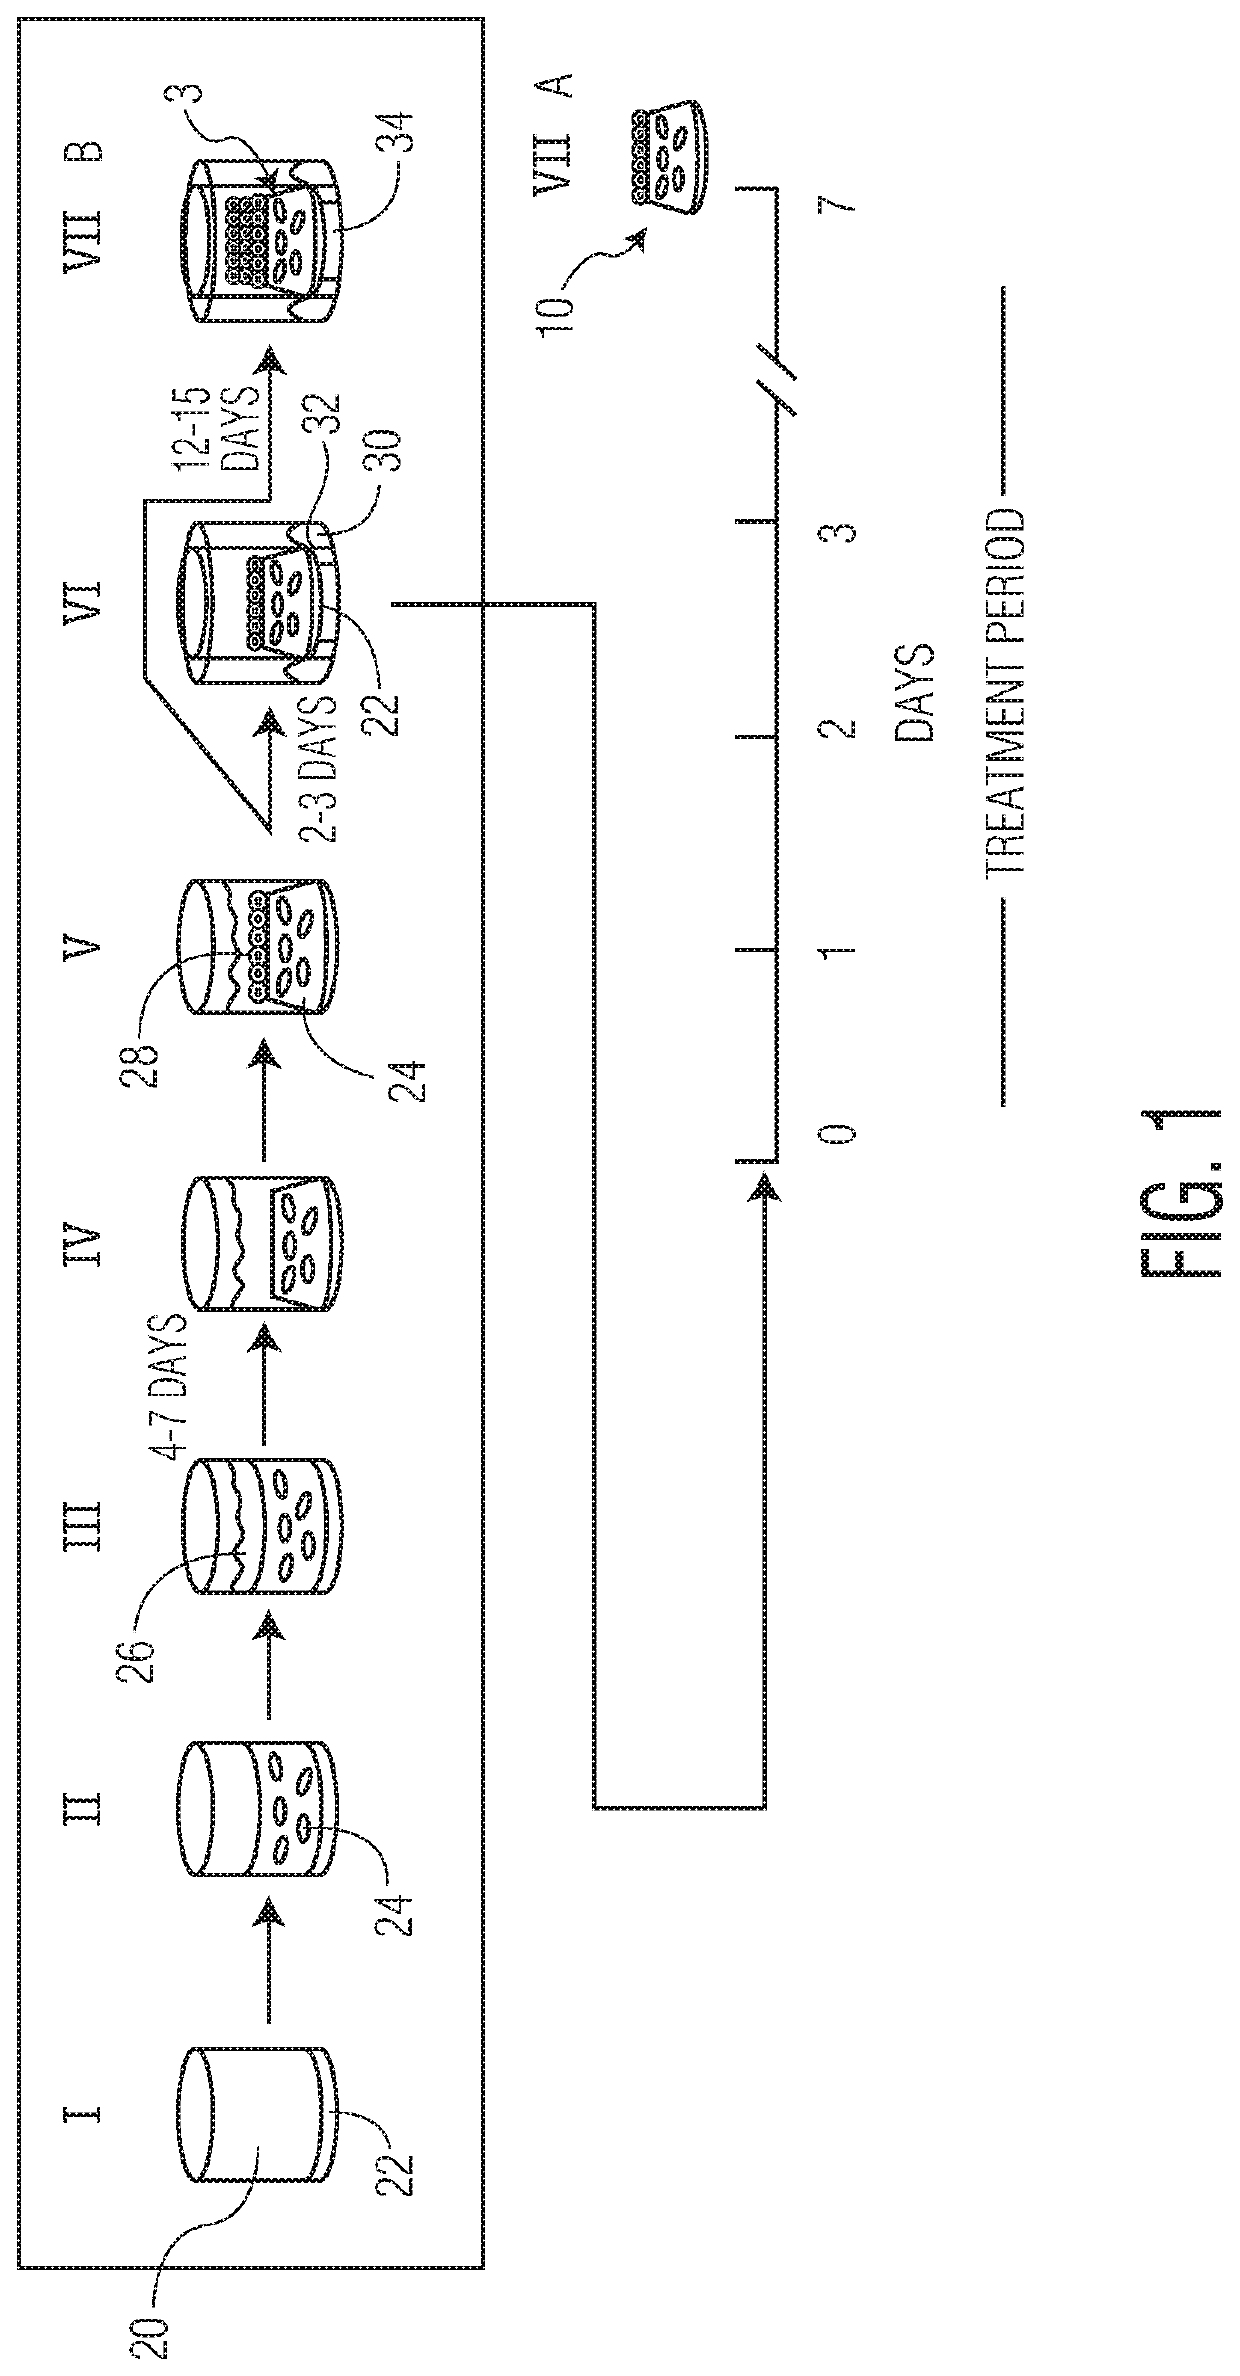 Premature infant skin model and method of creating the same